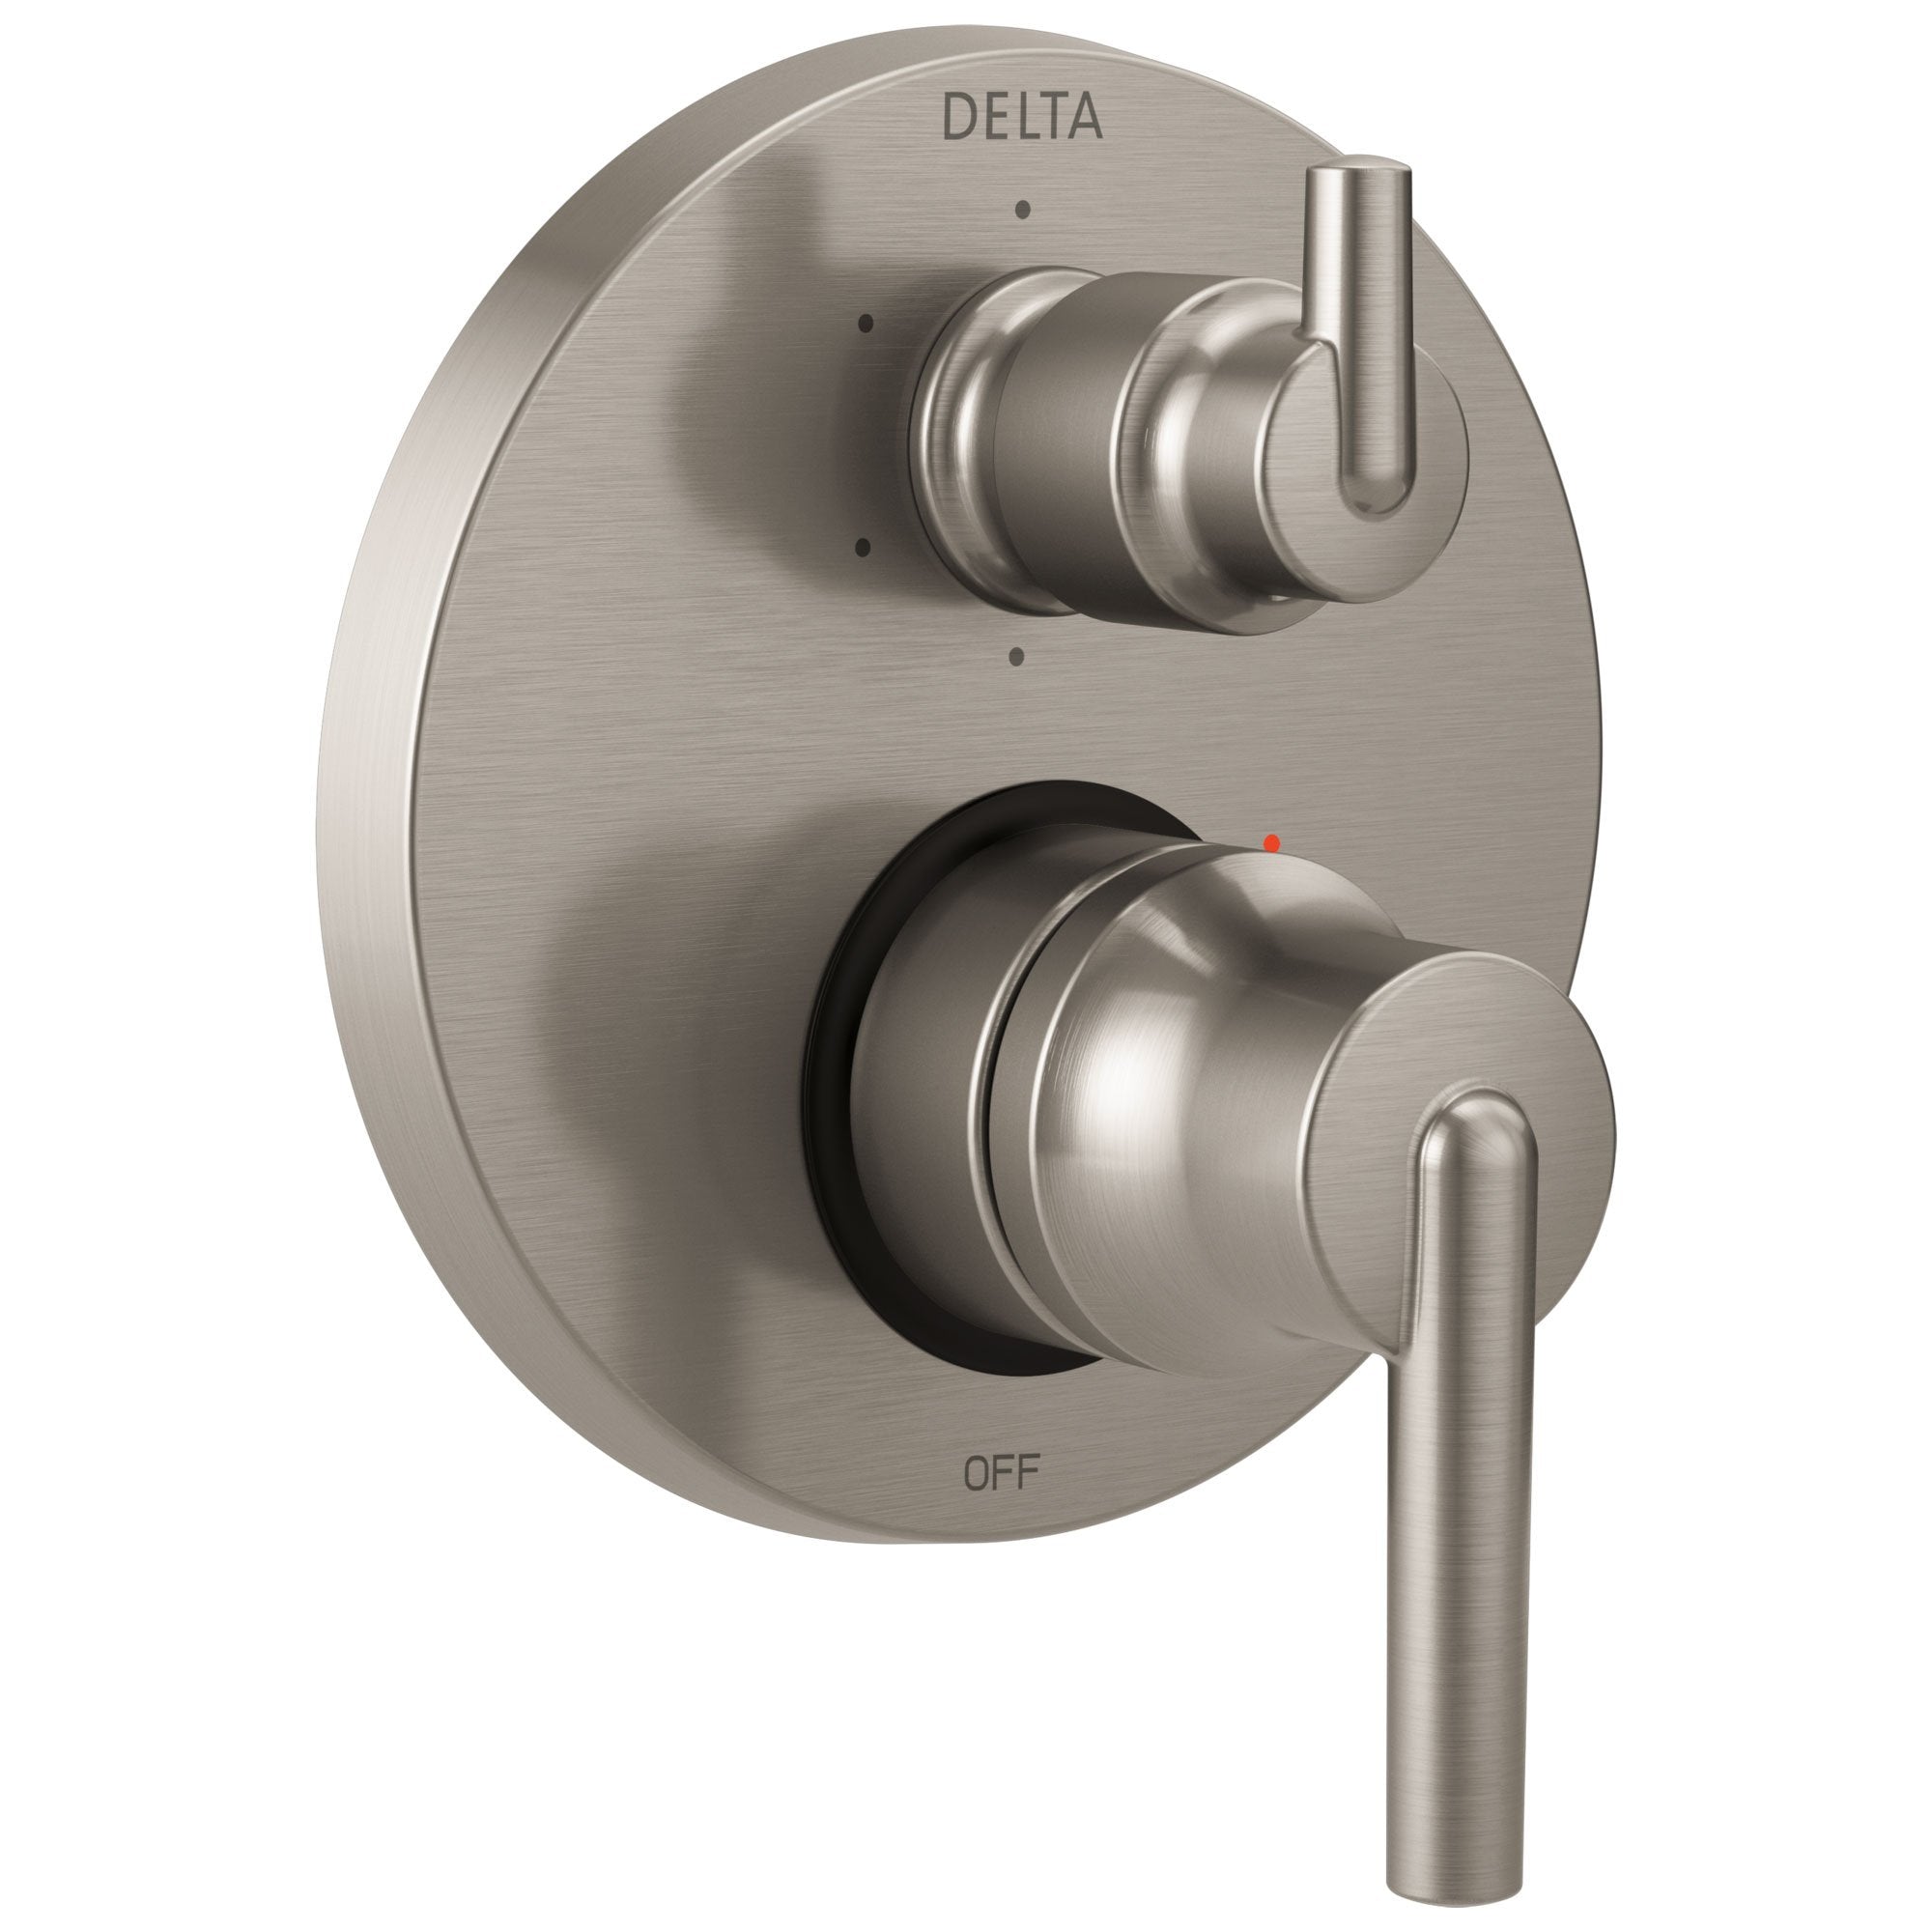 Delta Trinsic Collection Stainless Steel Finish Shower Faucet Control Handle with 6-Setting Integrated Diverter Includes Trim Kit and Valve without Stops D2196V